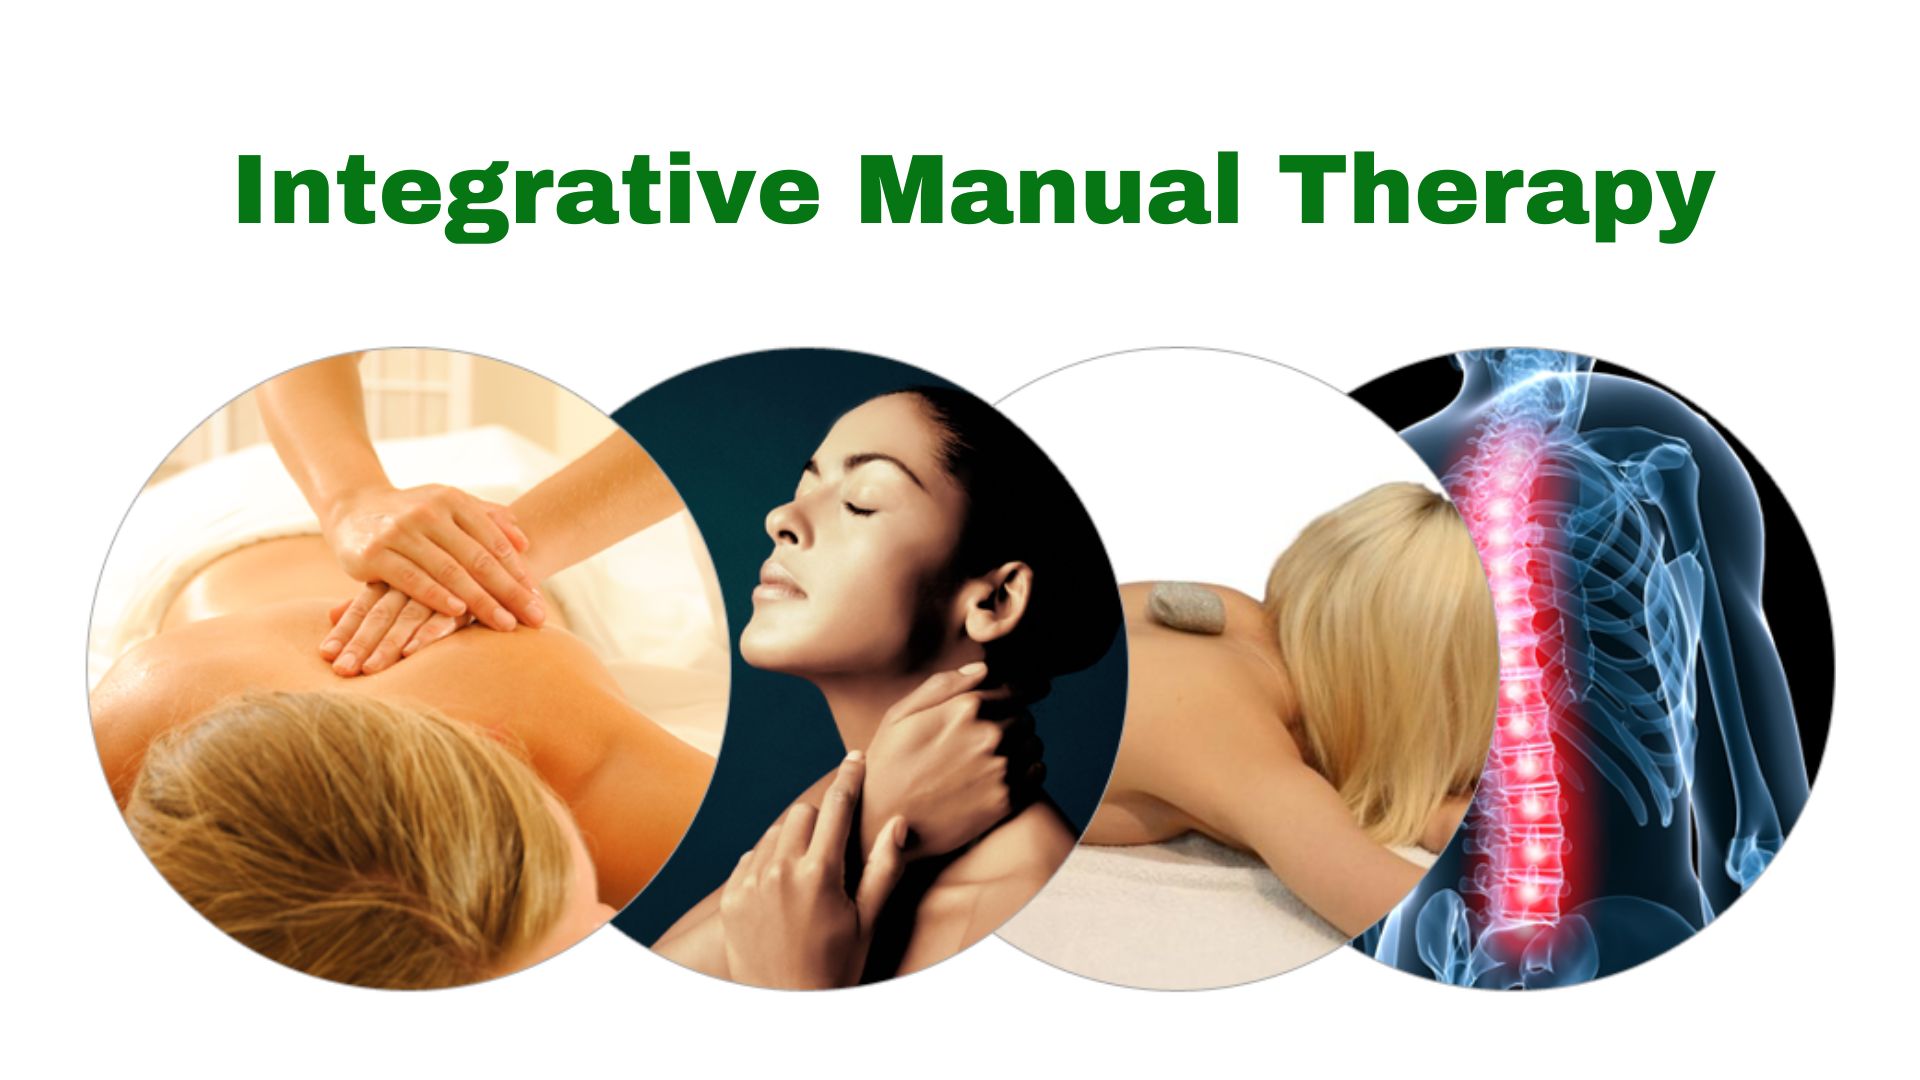 Effective Integrative Manual Therapy for Pain Management